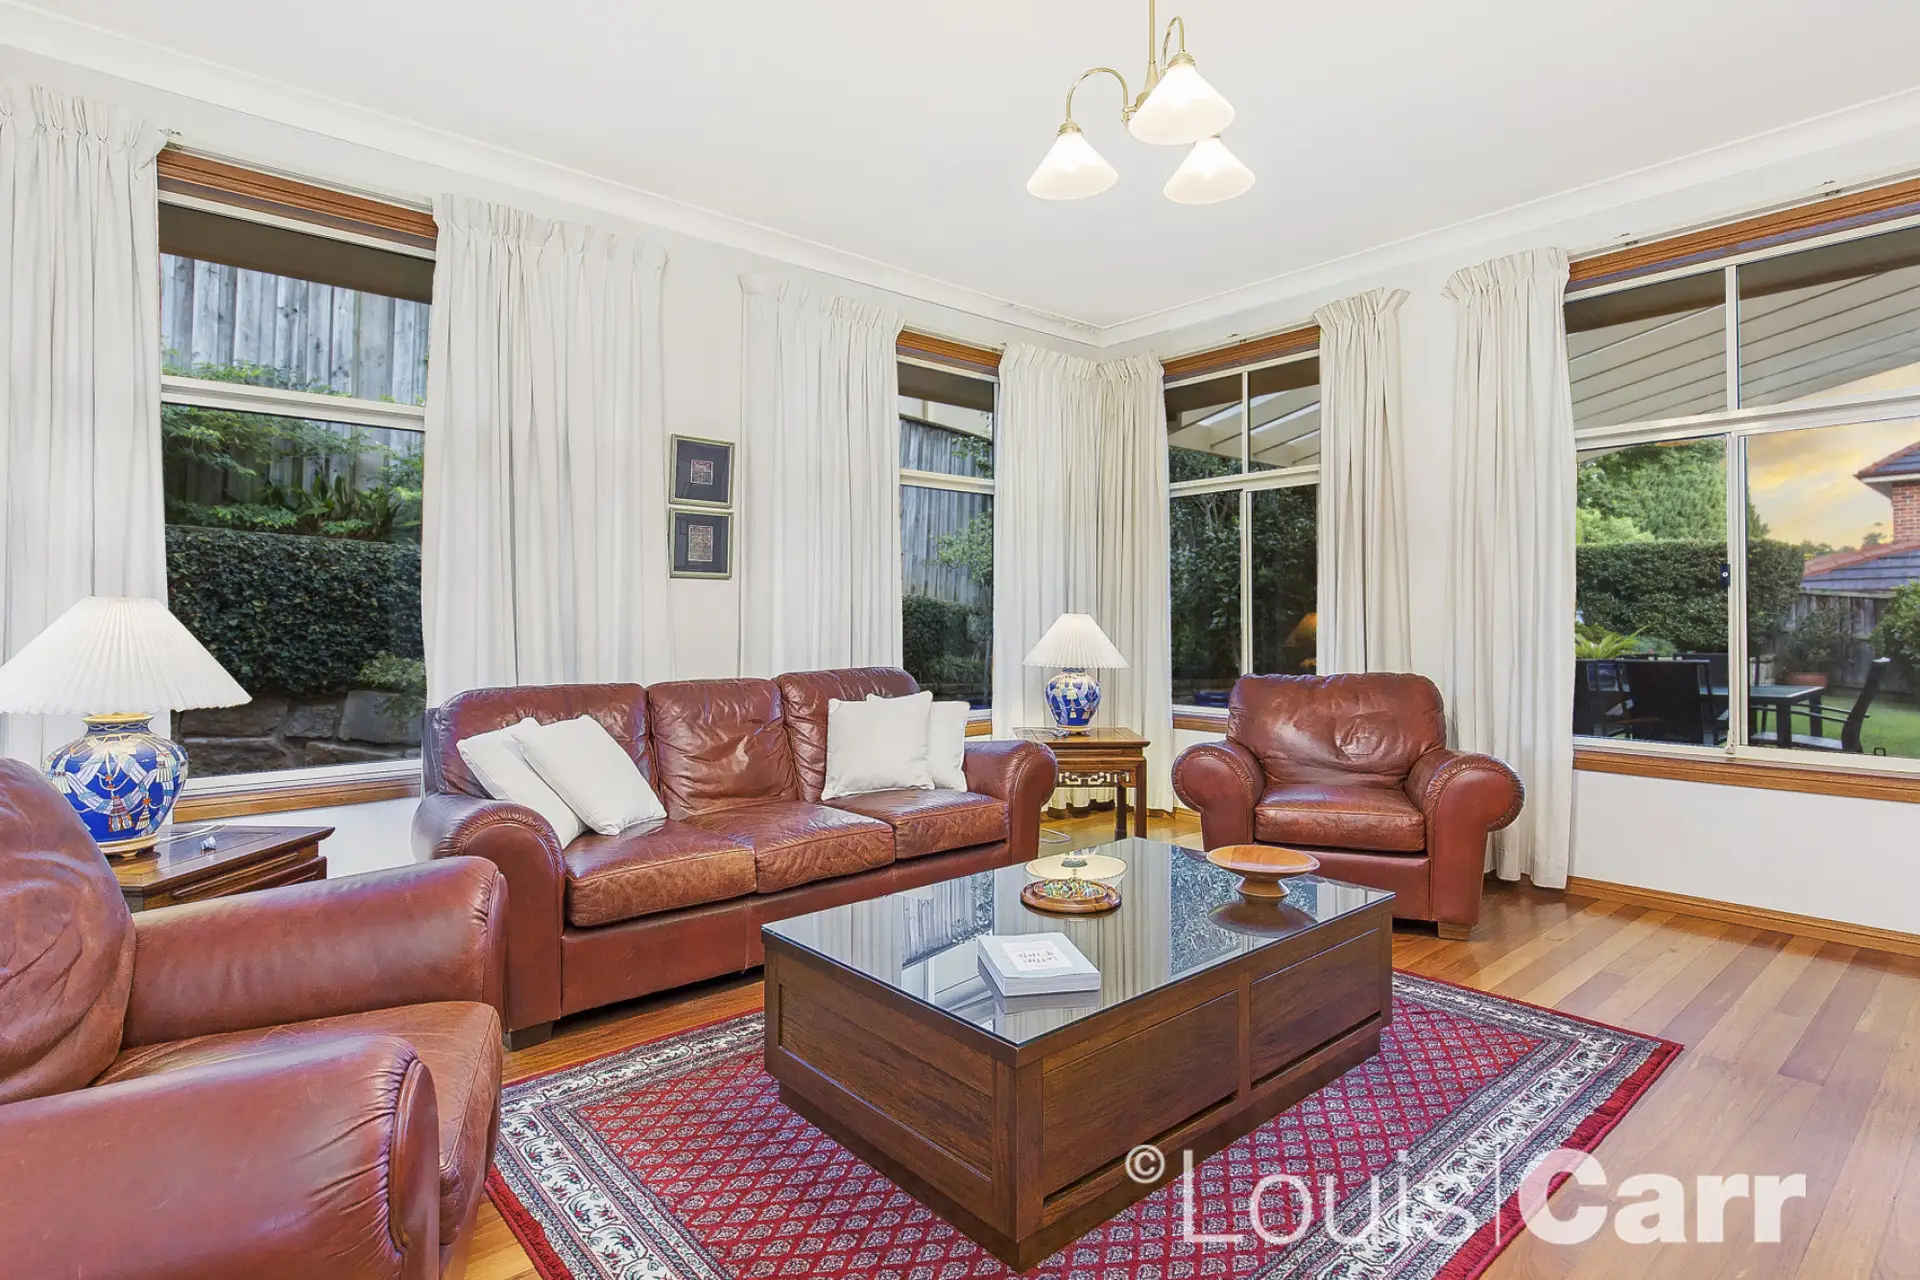 Photo #6: 5 Redwood Close, Castle Hill - Sold by Louis Carr Real Estate